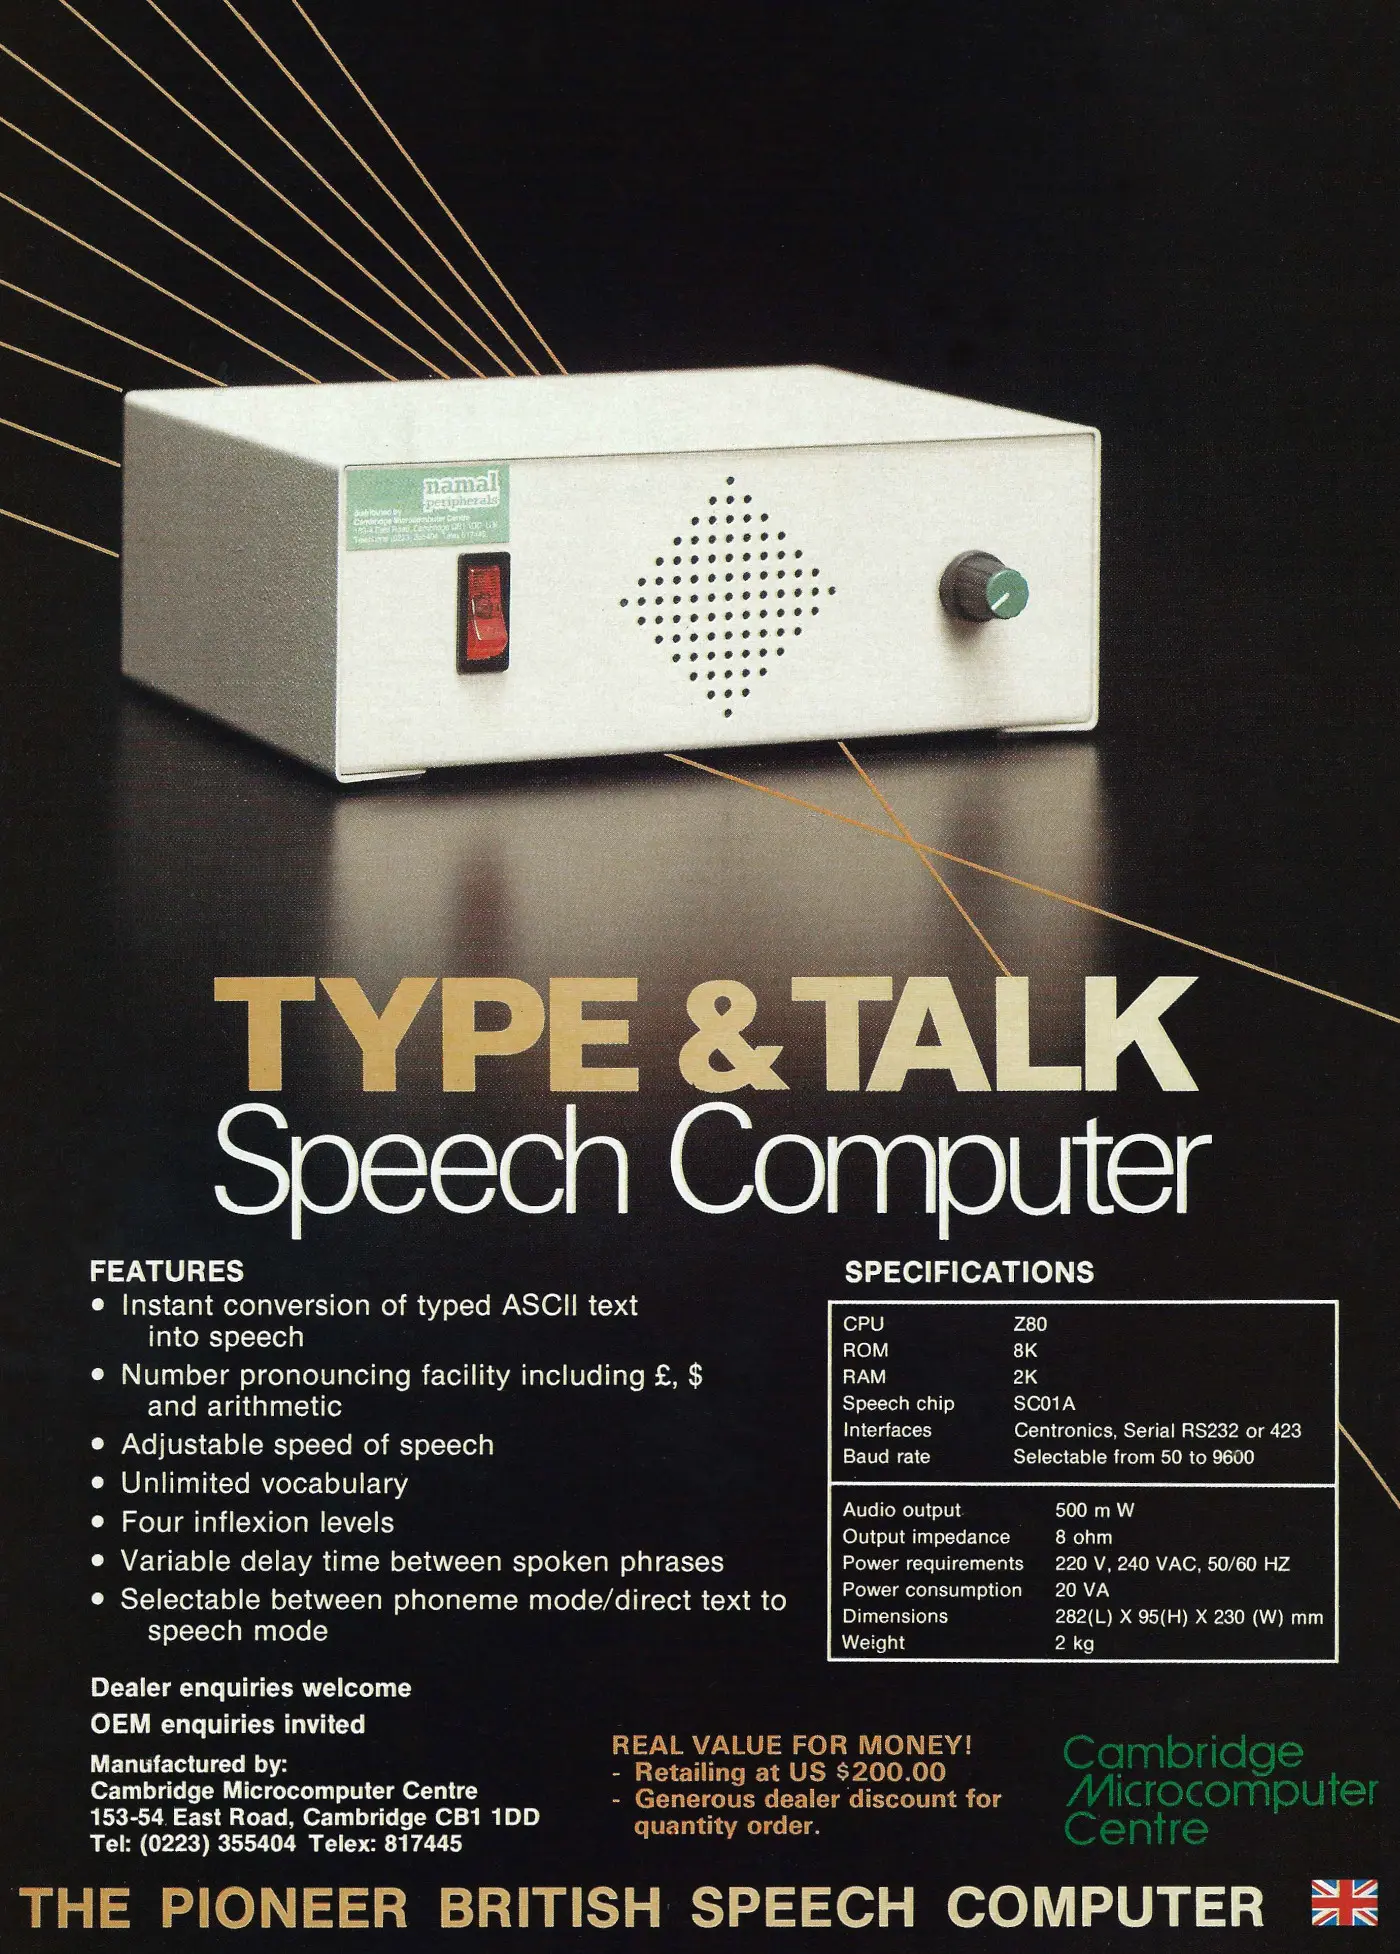 Namal Advert: Type and Talk Speech Computer, from Personal Computer World, April 1985